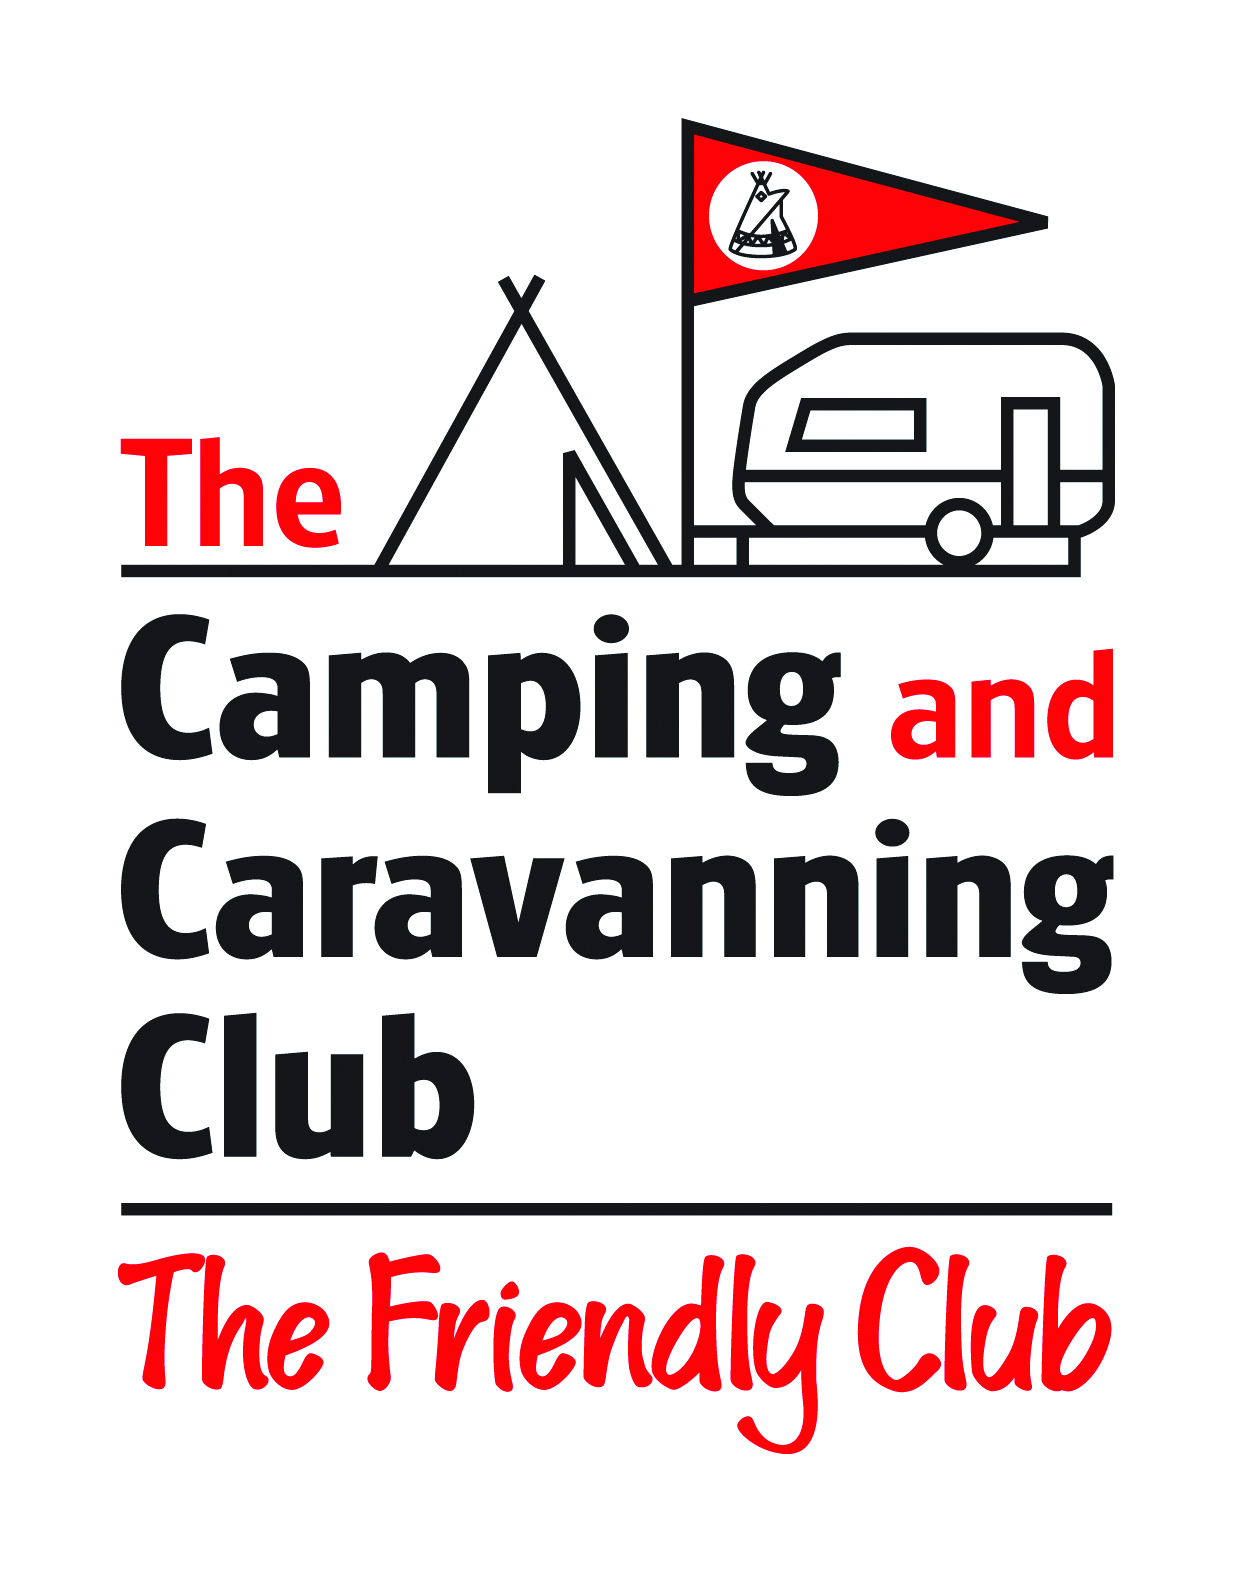 The camping and caravanning club logo